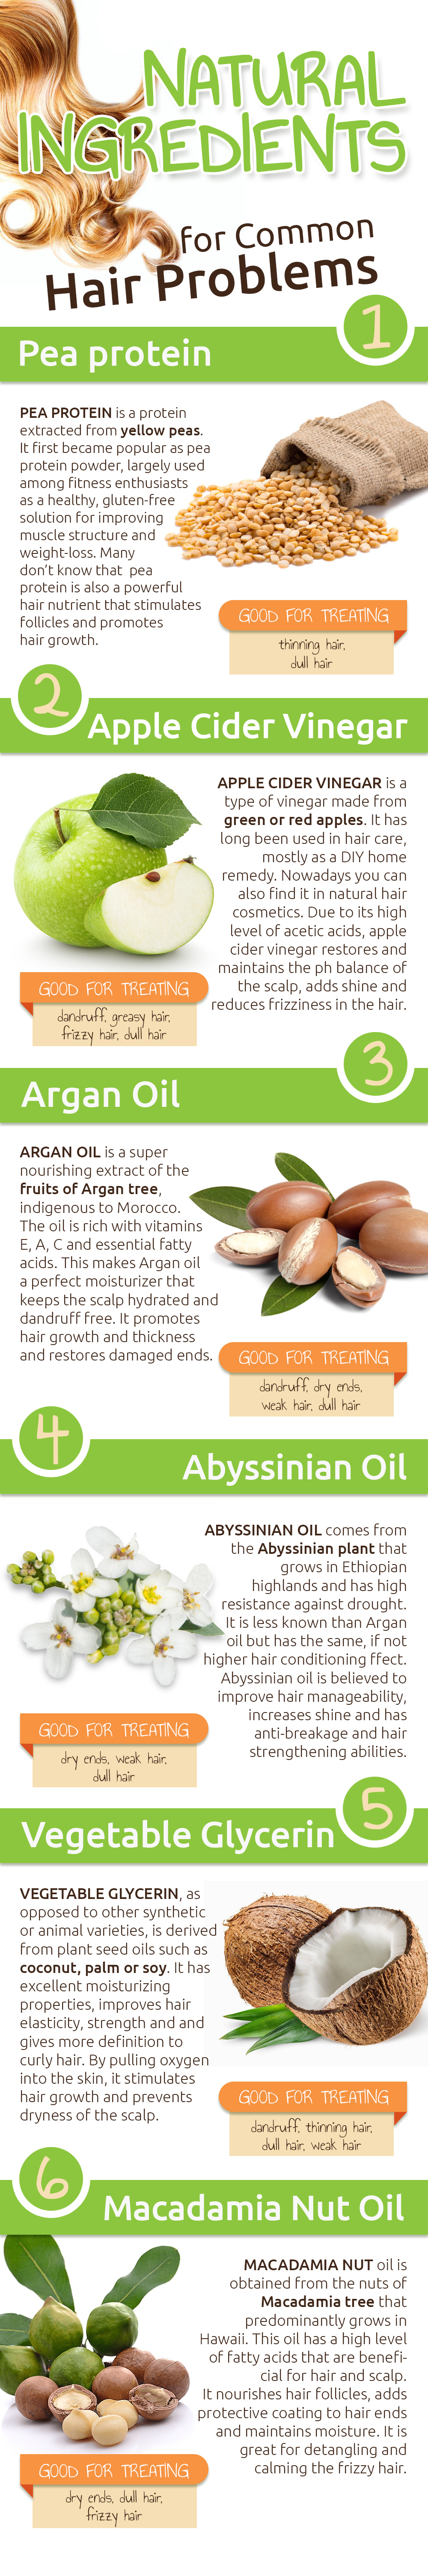 Natural Ingredients for Common Hair Problems infographic